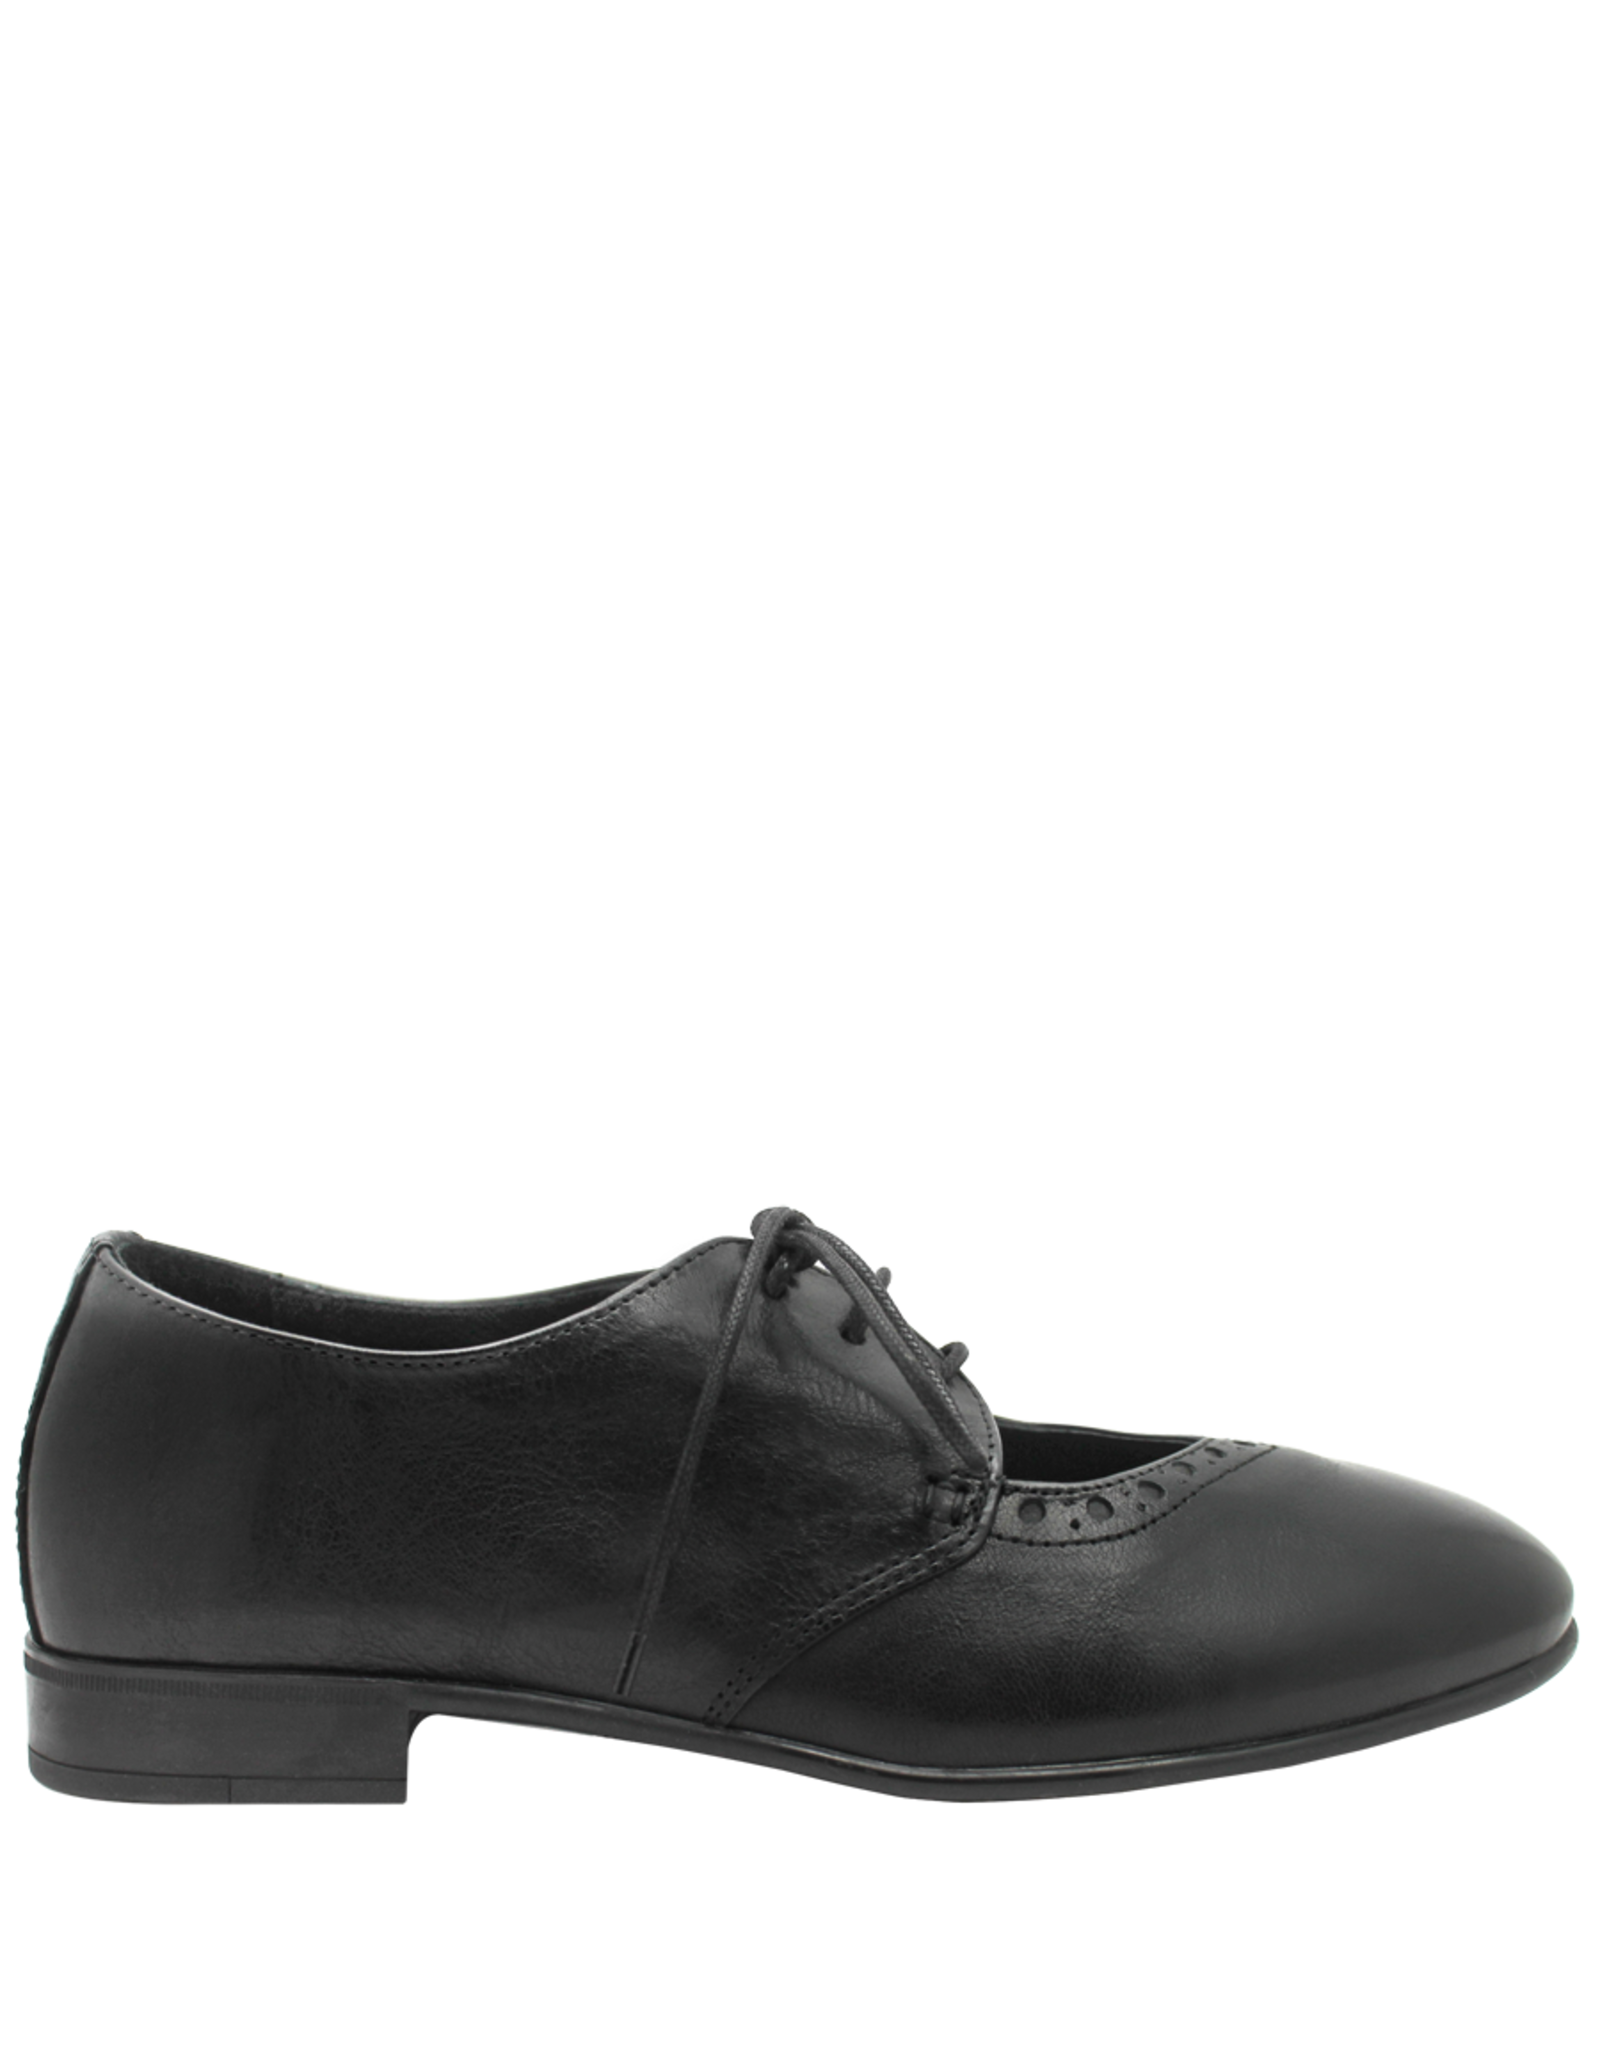 Anis Anis AS4H Black Oxford With Cut Out Accent Perri